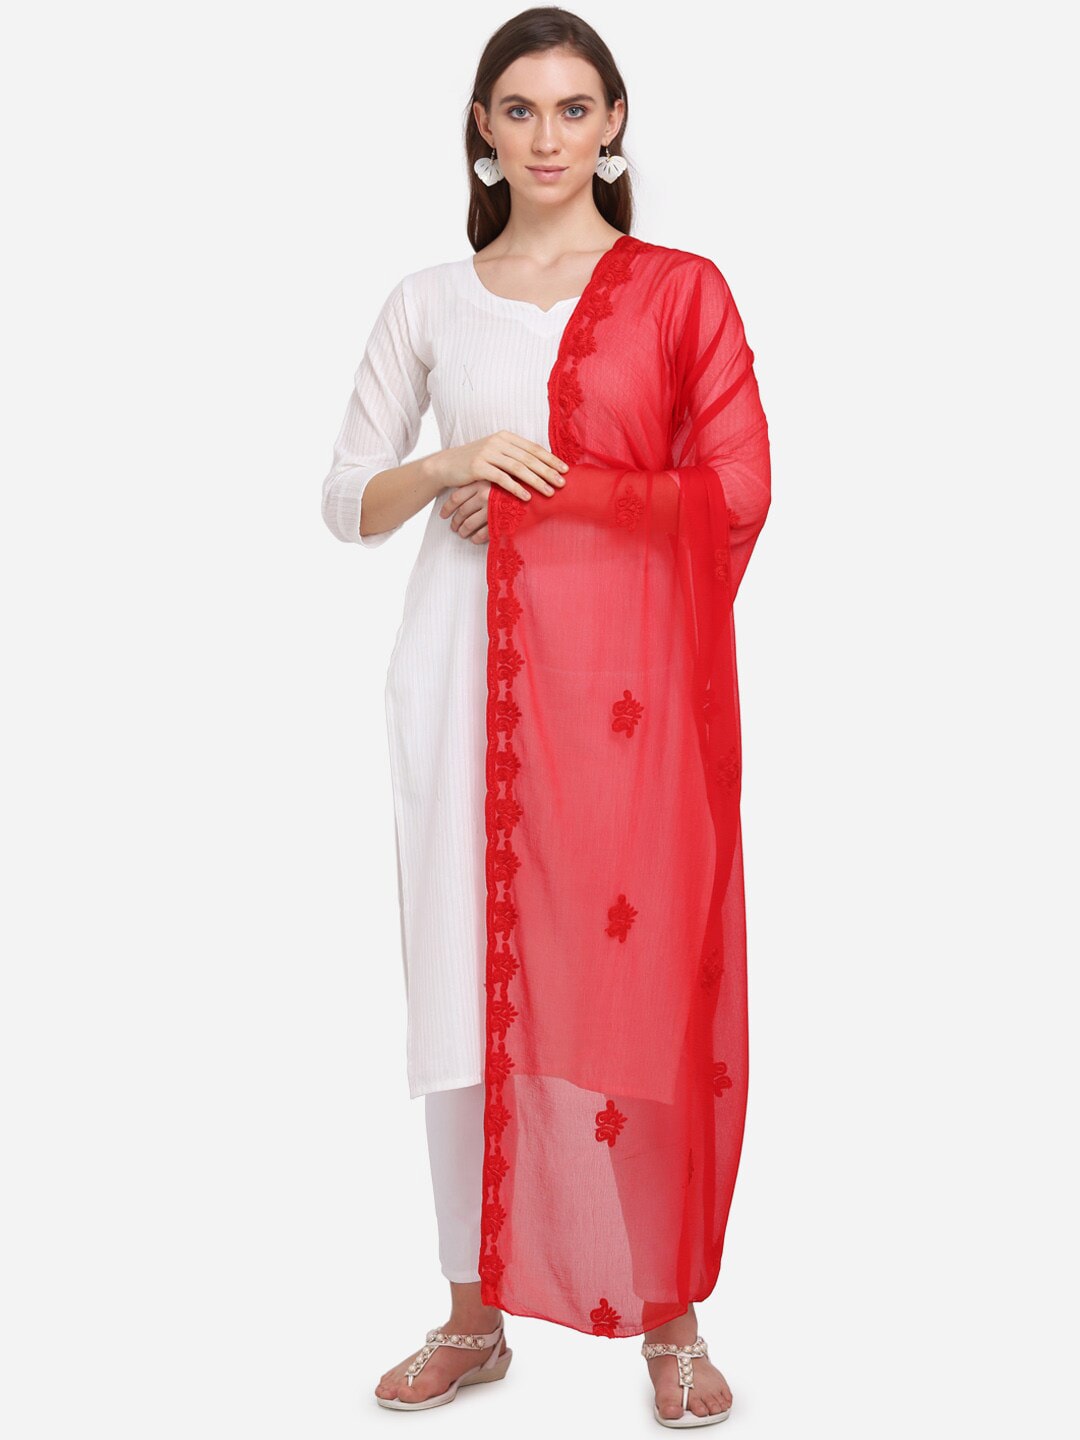 mf Red Embroidered Dupatta Price in India